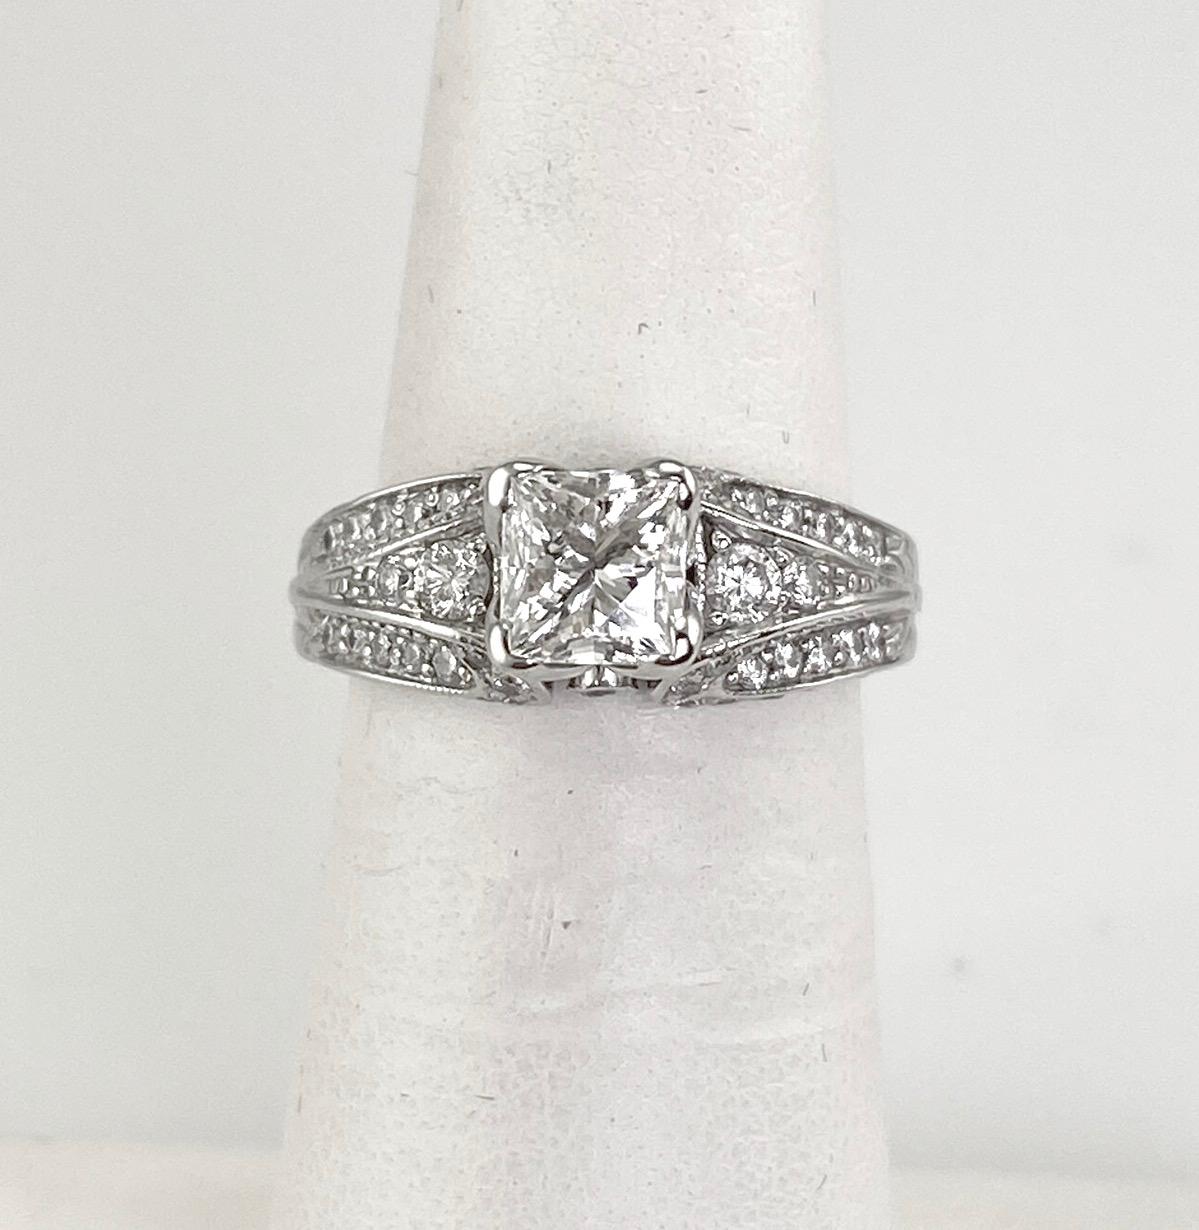 Women's diamond engagement ring consisting of .98 carat Leo princess cut center and round diamonds along the sides. The total diamond weight is 1.54 Ct. The mounting is 18 karat white gold. The center diamond is SI1; G and has the Leo serial number